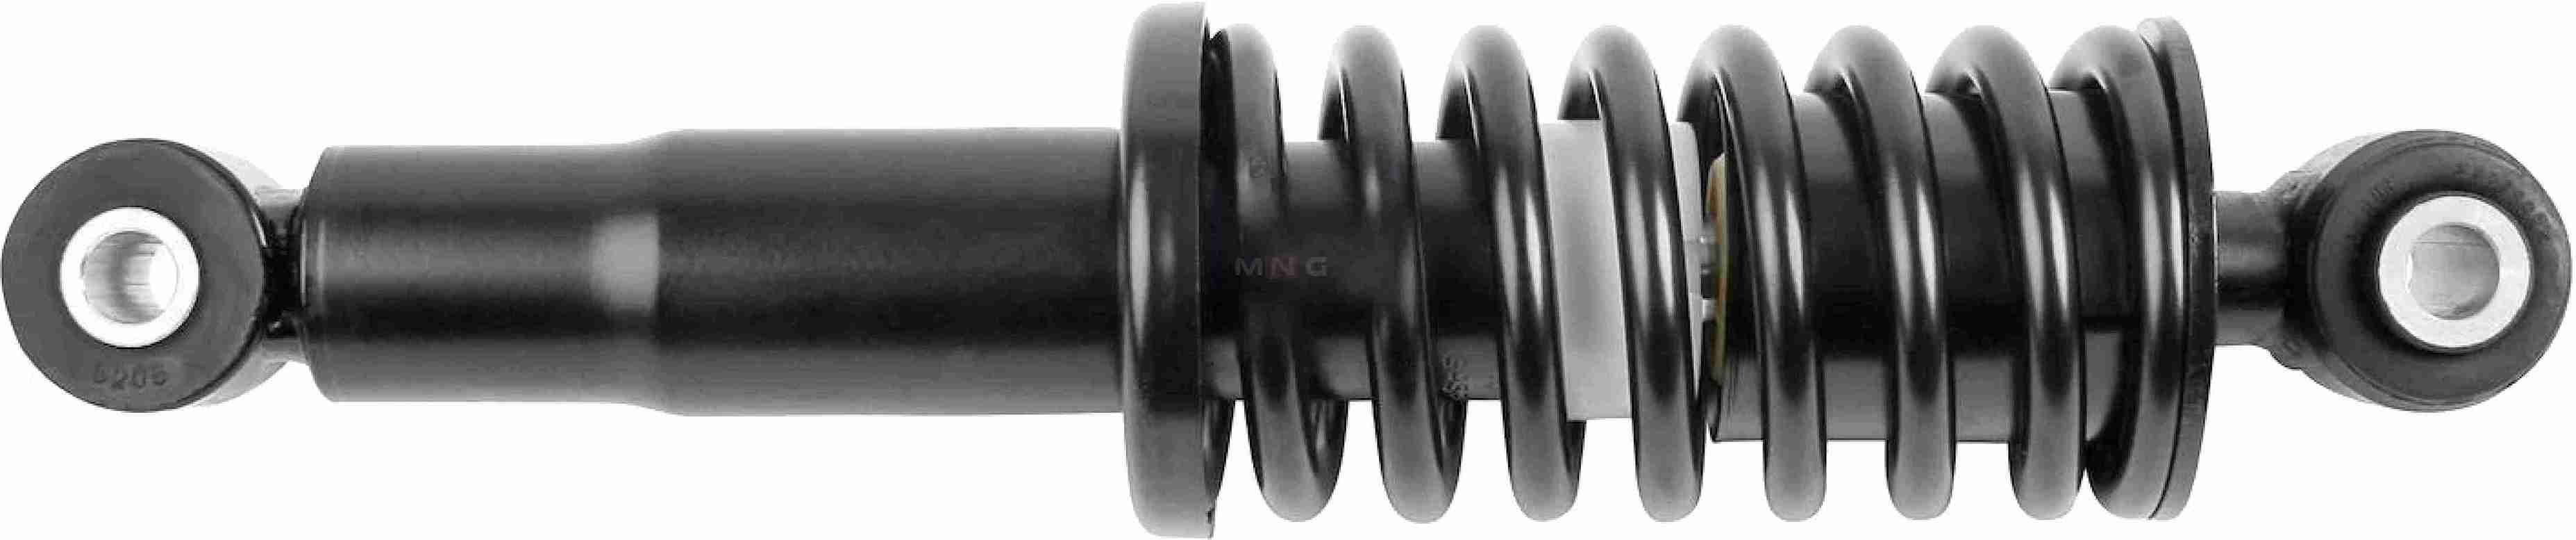 500387621-MNG-SHOCK-ABSORBER-IVECO